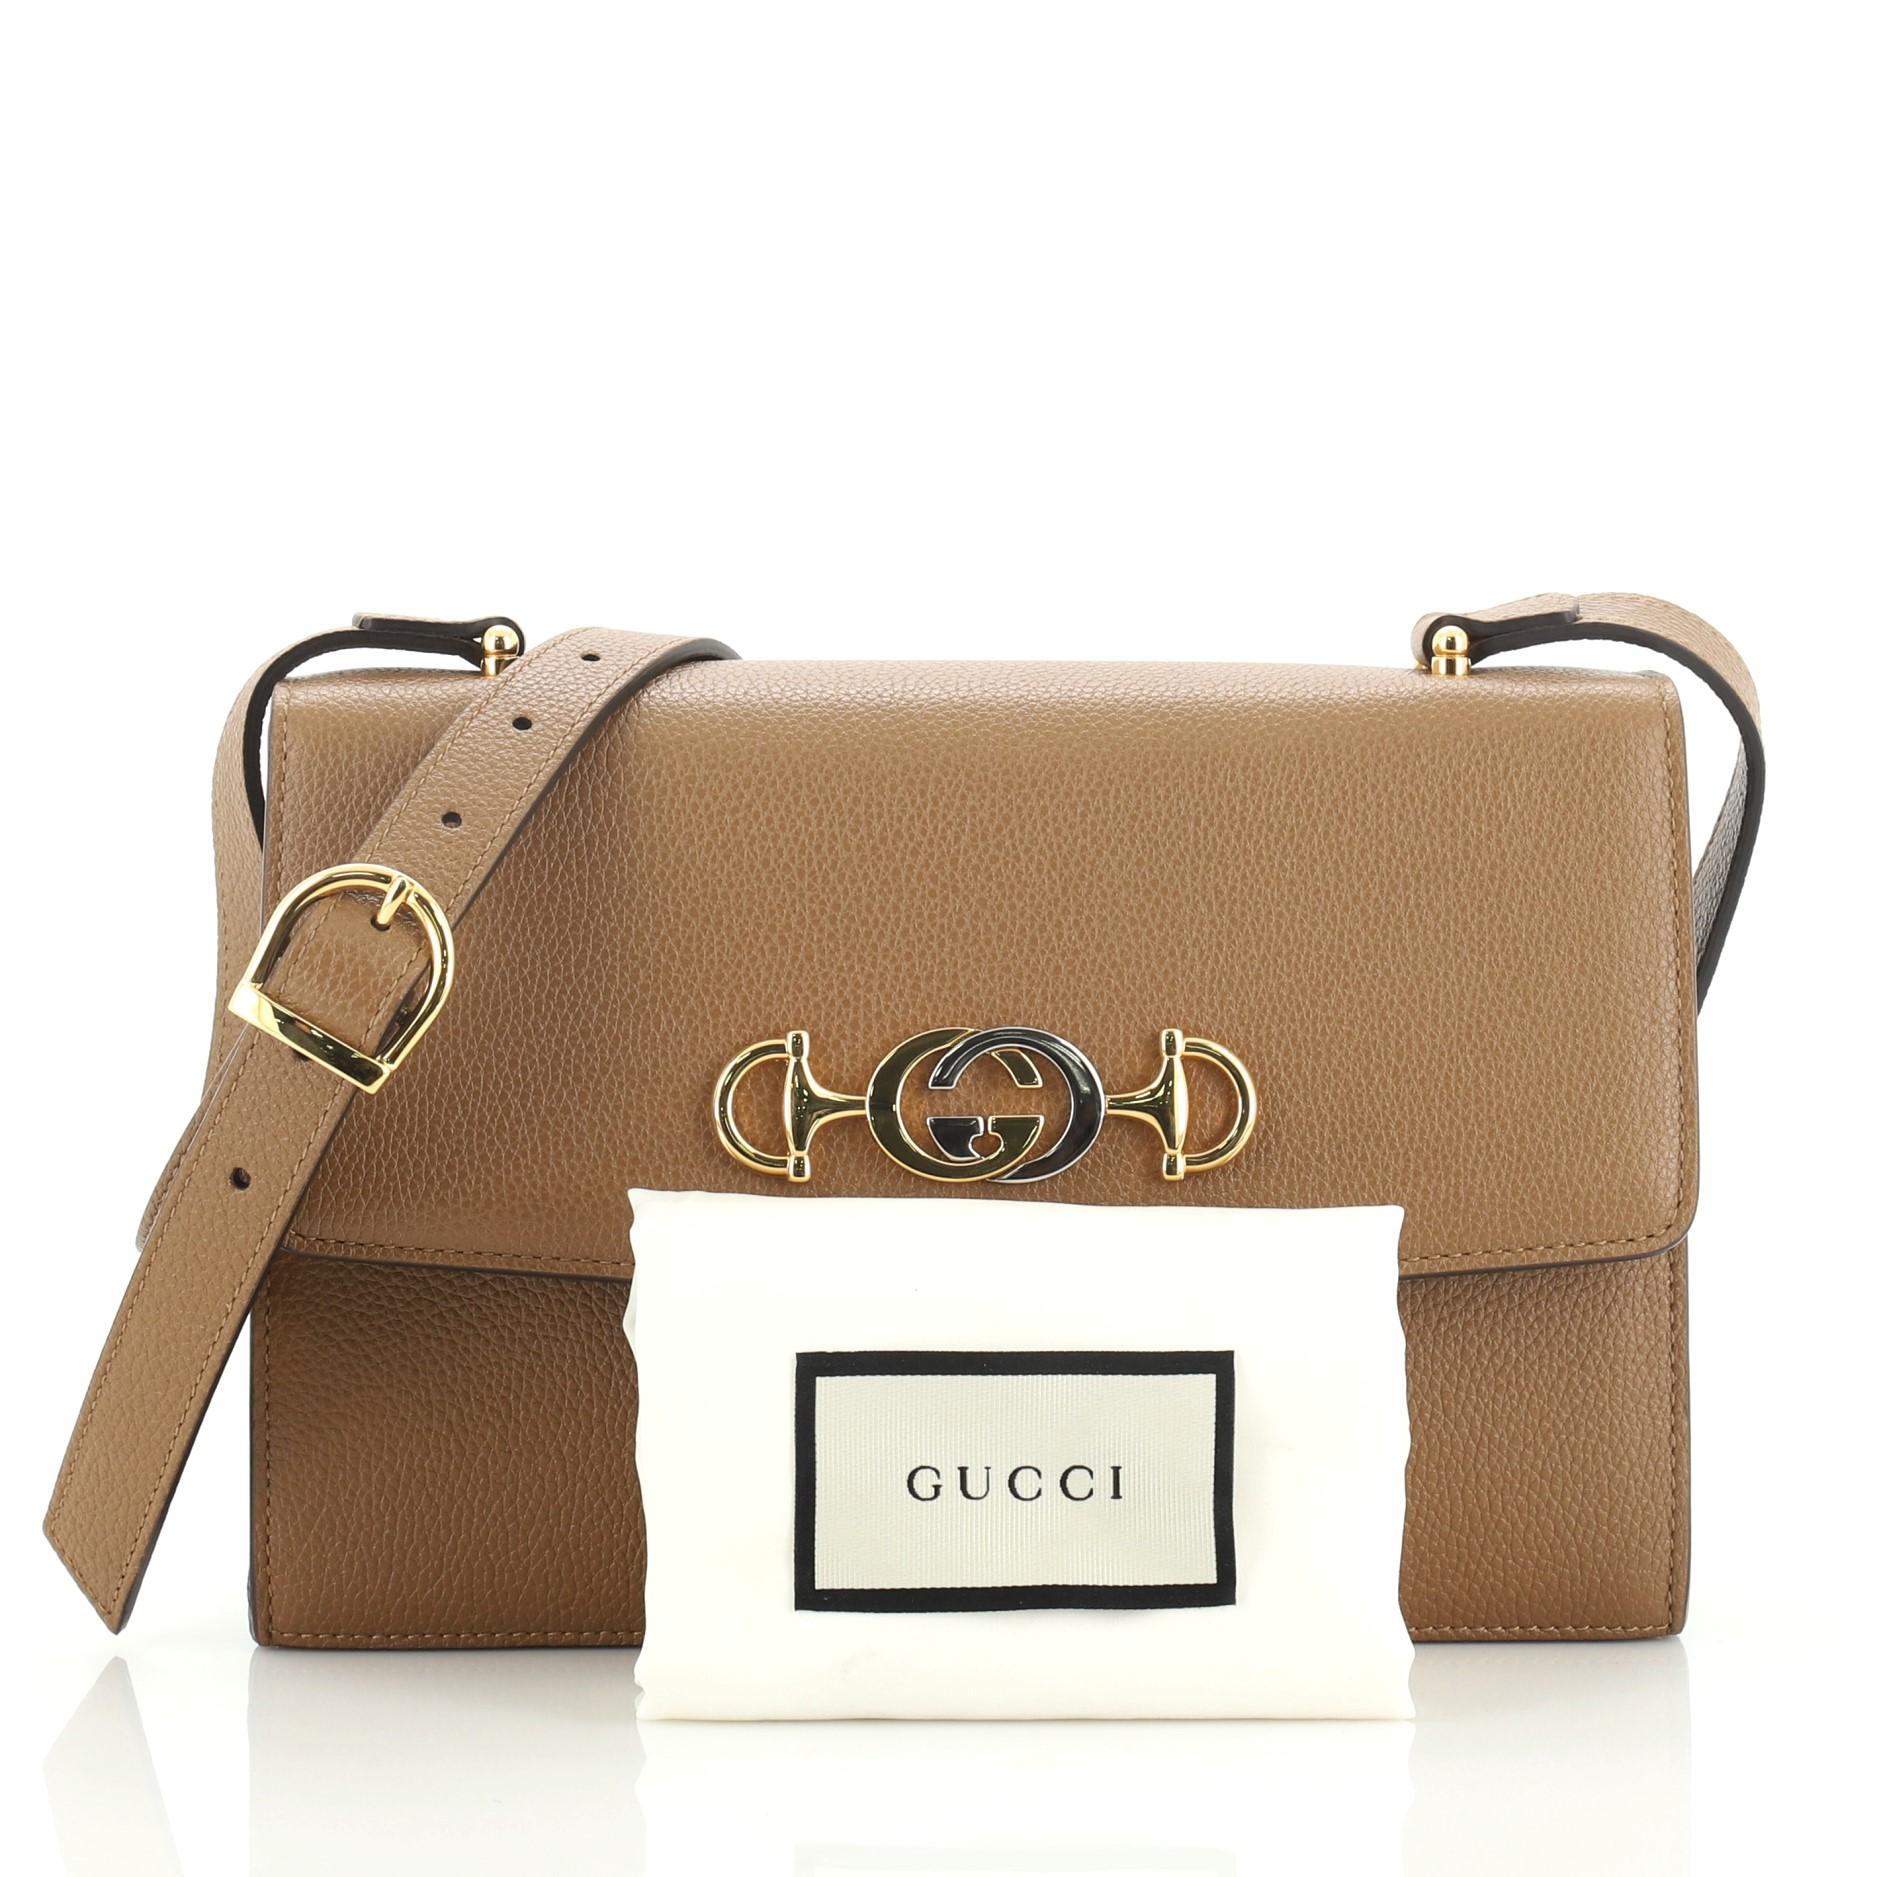 This Gucci Zumi Shoulder Bag Leather Small, crafted in brown leather, features adjustable leather strap, interlocking G Horsebit, and gold and silver-tone hardware. Its push lock closure opens to a gray fabric interior with slip pockets.

Condition: